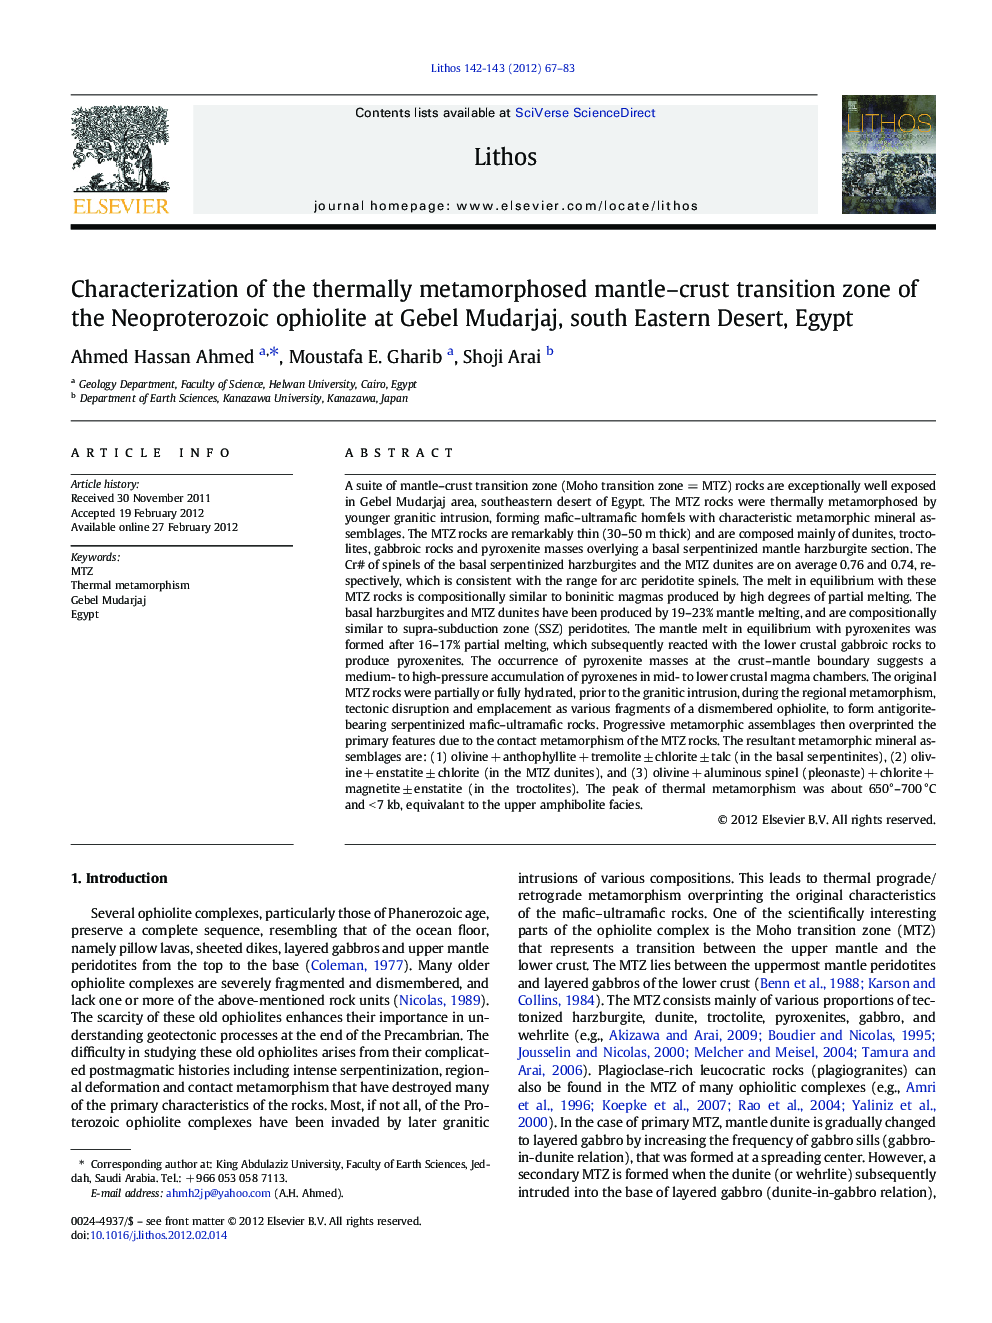 Characterization of the thermally metamorphosed mantle–crust transition zone of the Neoproterozoic ophiolite at Gebel Mudarjaj, south Eastern Desert, Egypt